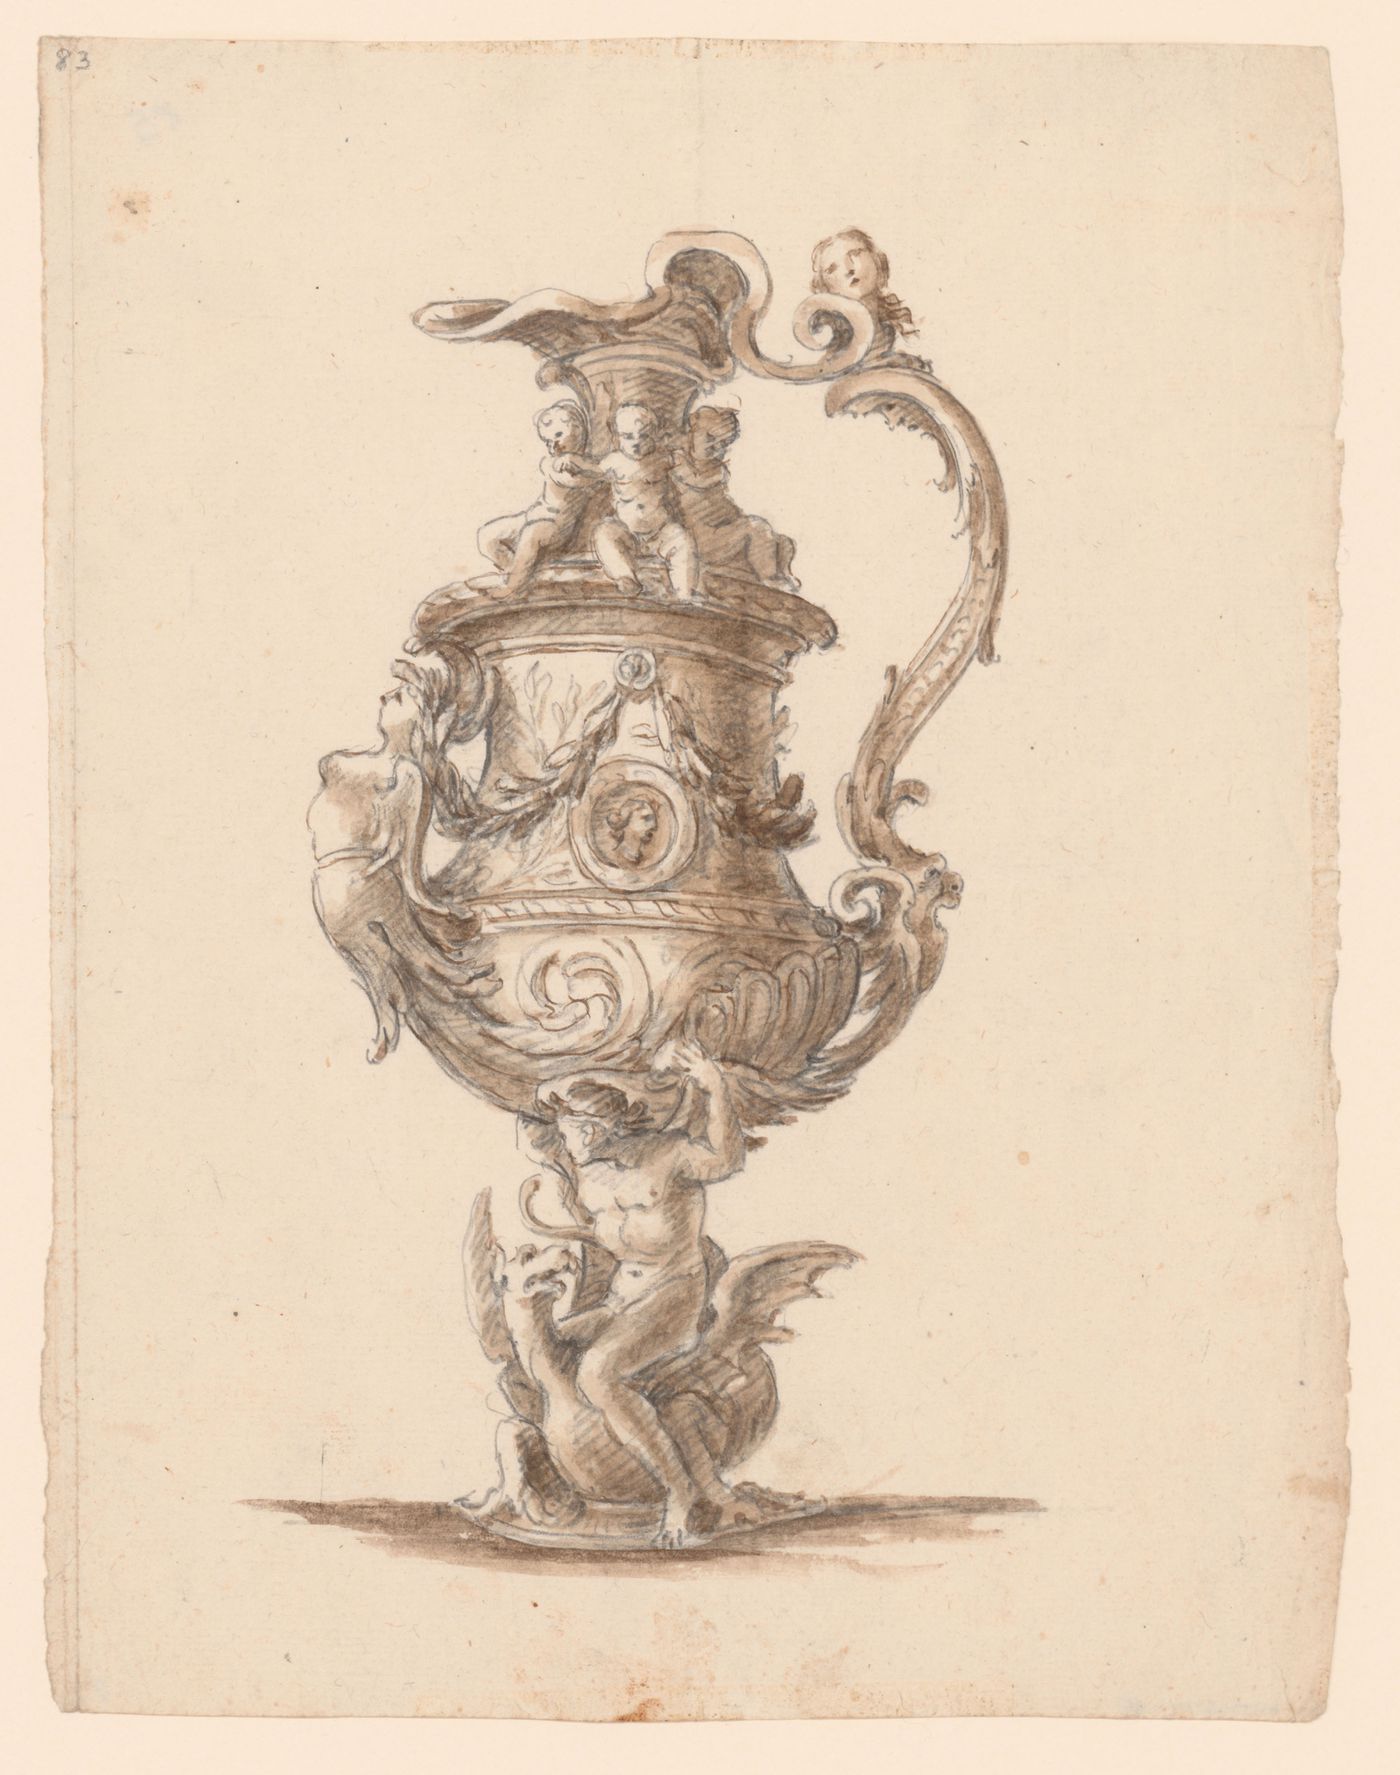 Drawing for an ornamental vase with a male figure riding a bat-winged monster